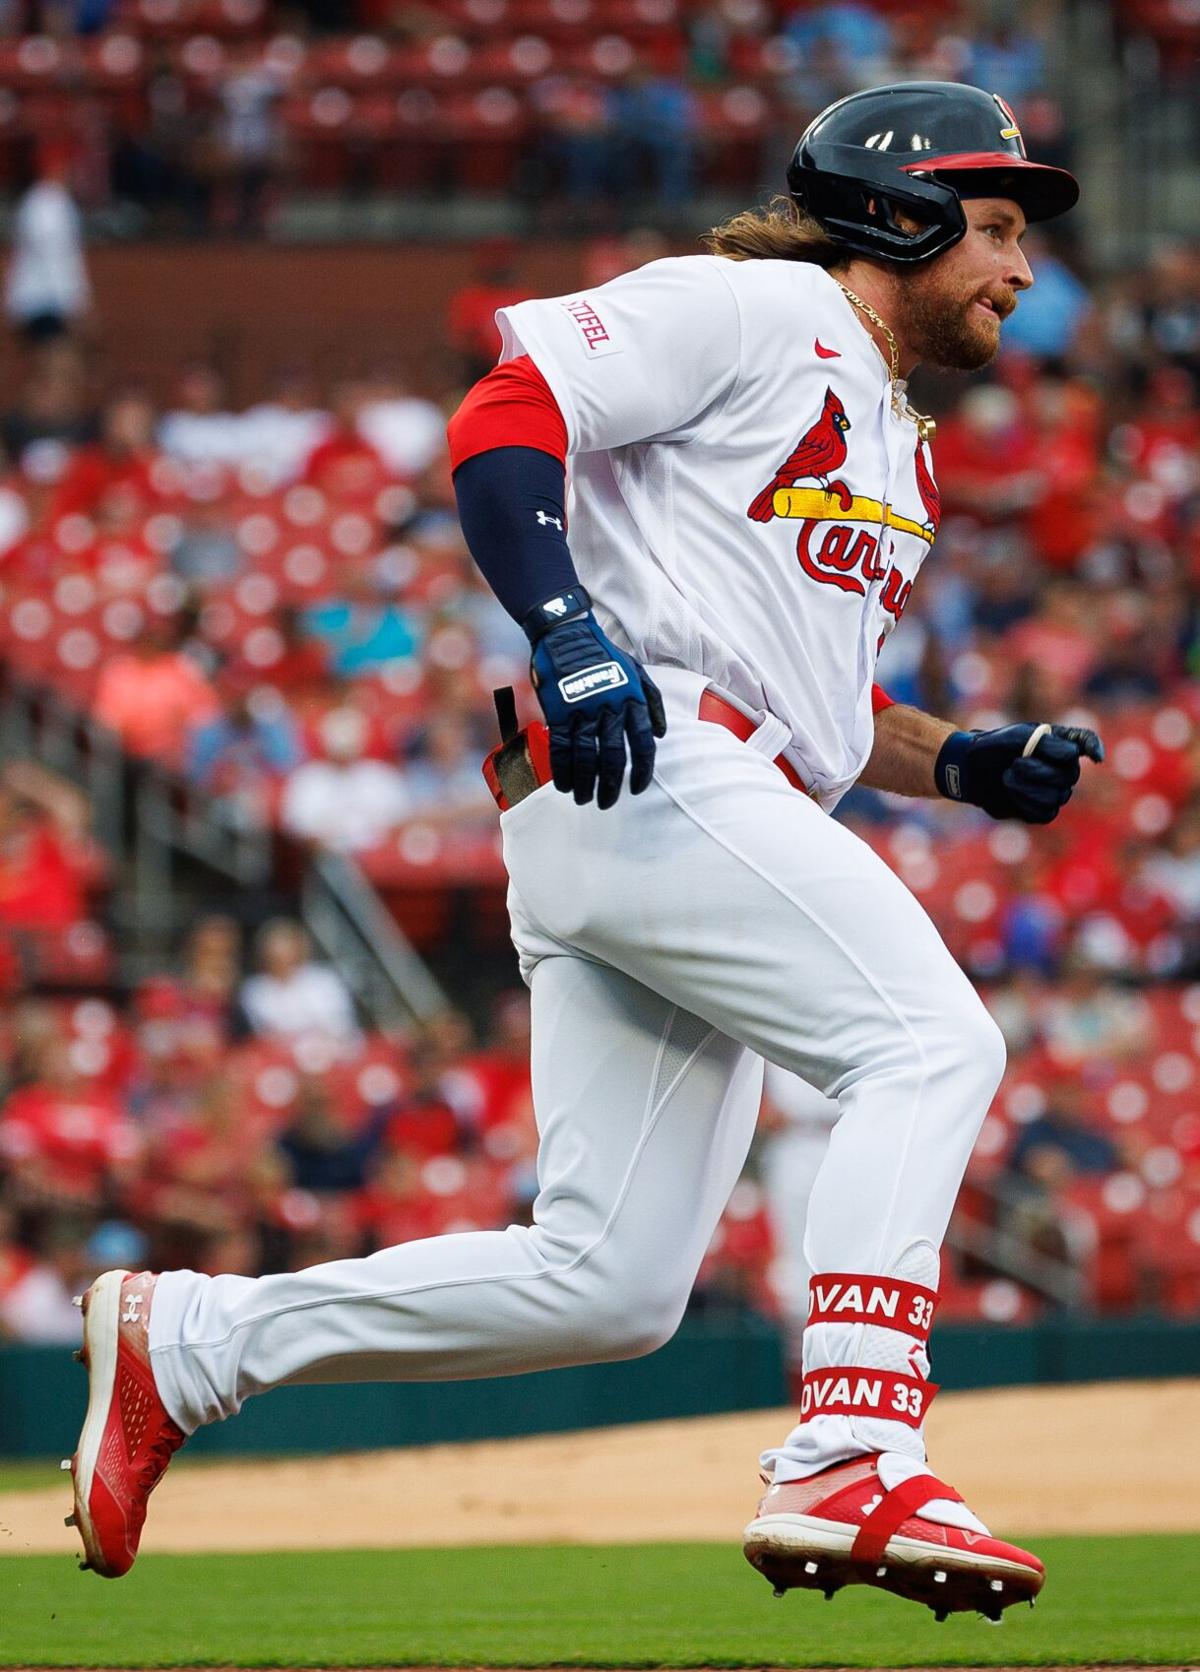 The Cardinals are never going to be bad again. How St. Louis concocts a  magic brew to play winning baseball every year